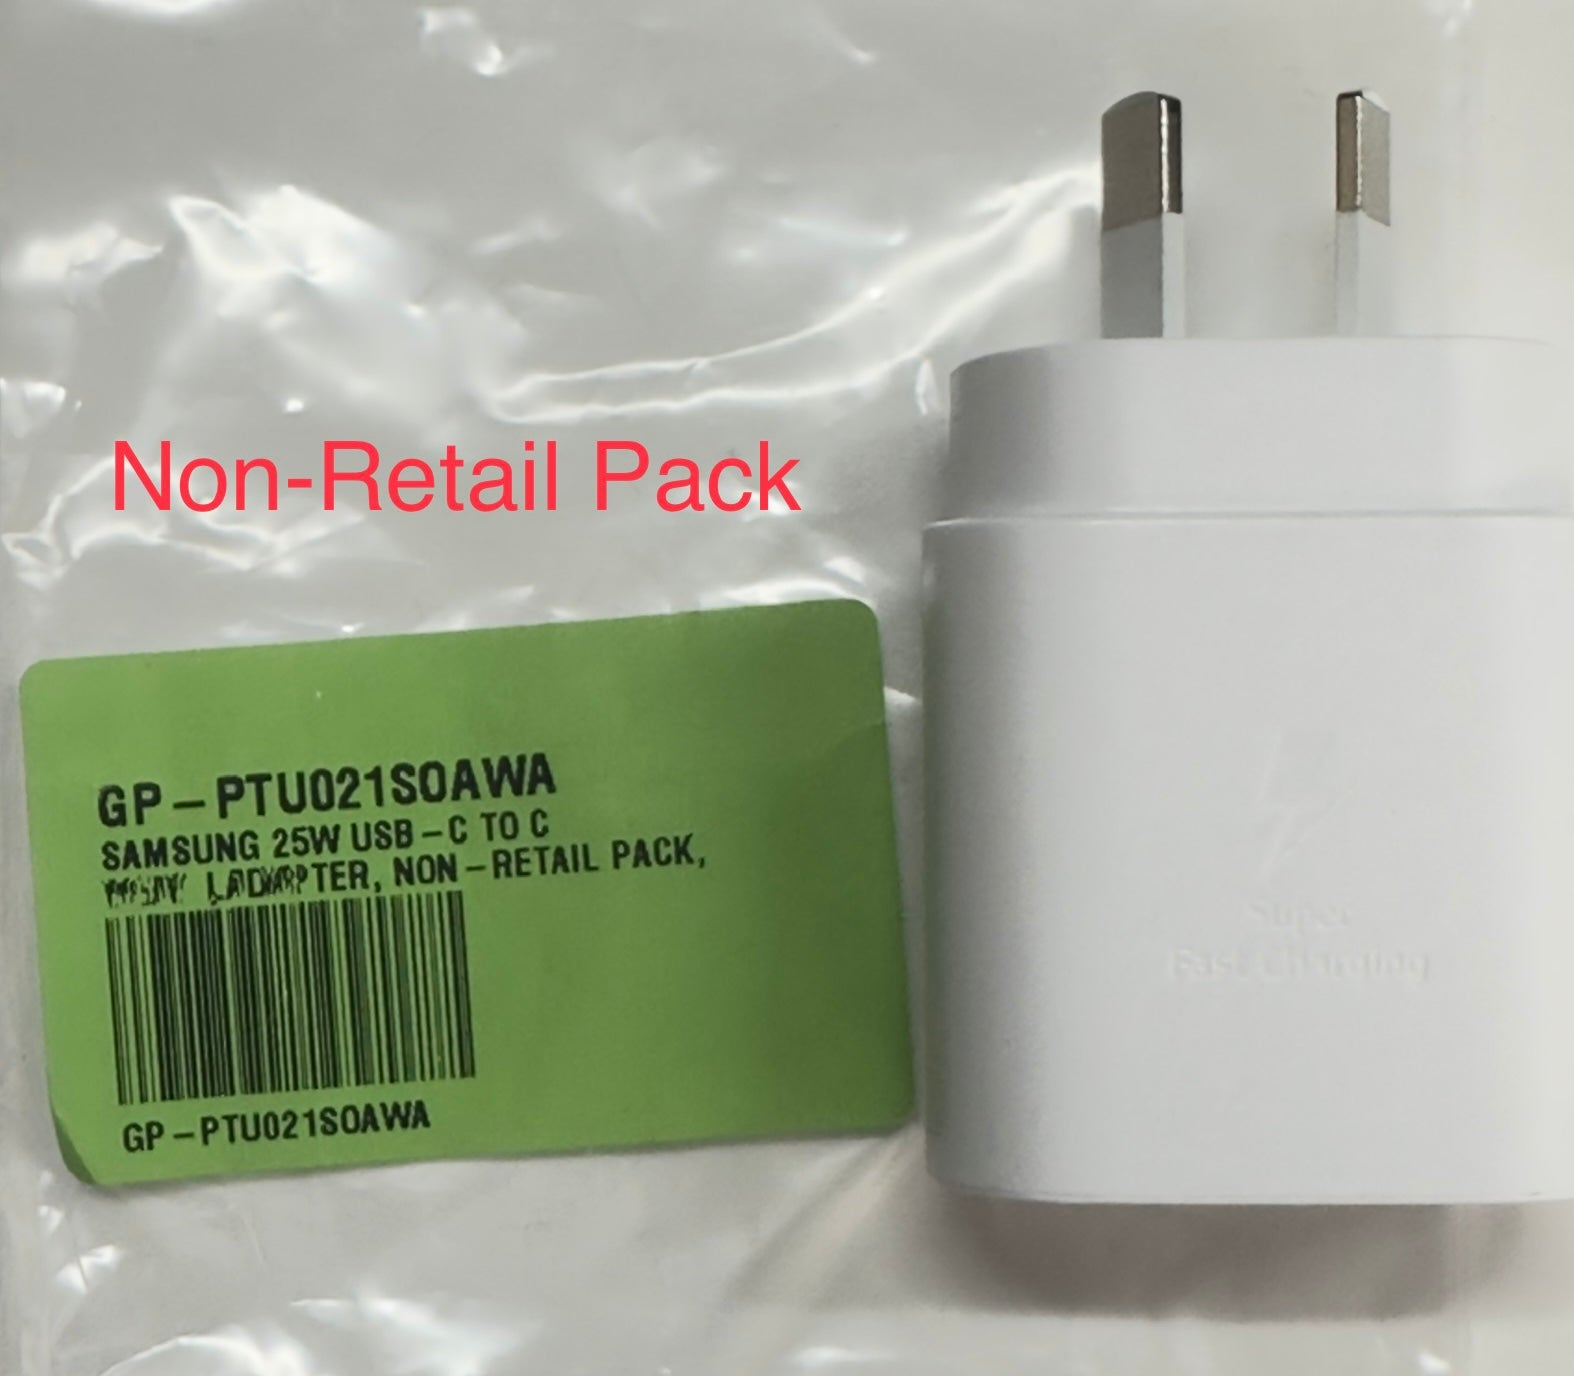 Samsung Wall Charger for Super Fast Charging 25W - White EP-TA800NWEGAU Non-Retail Package